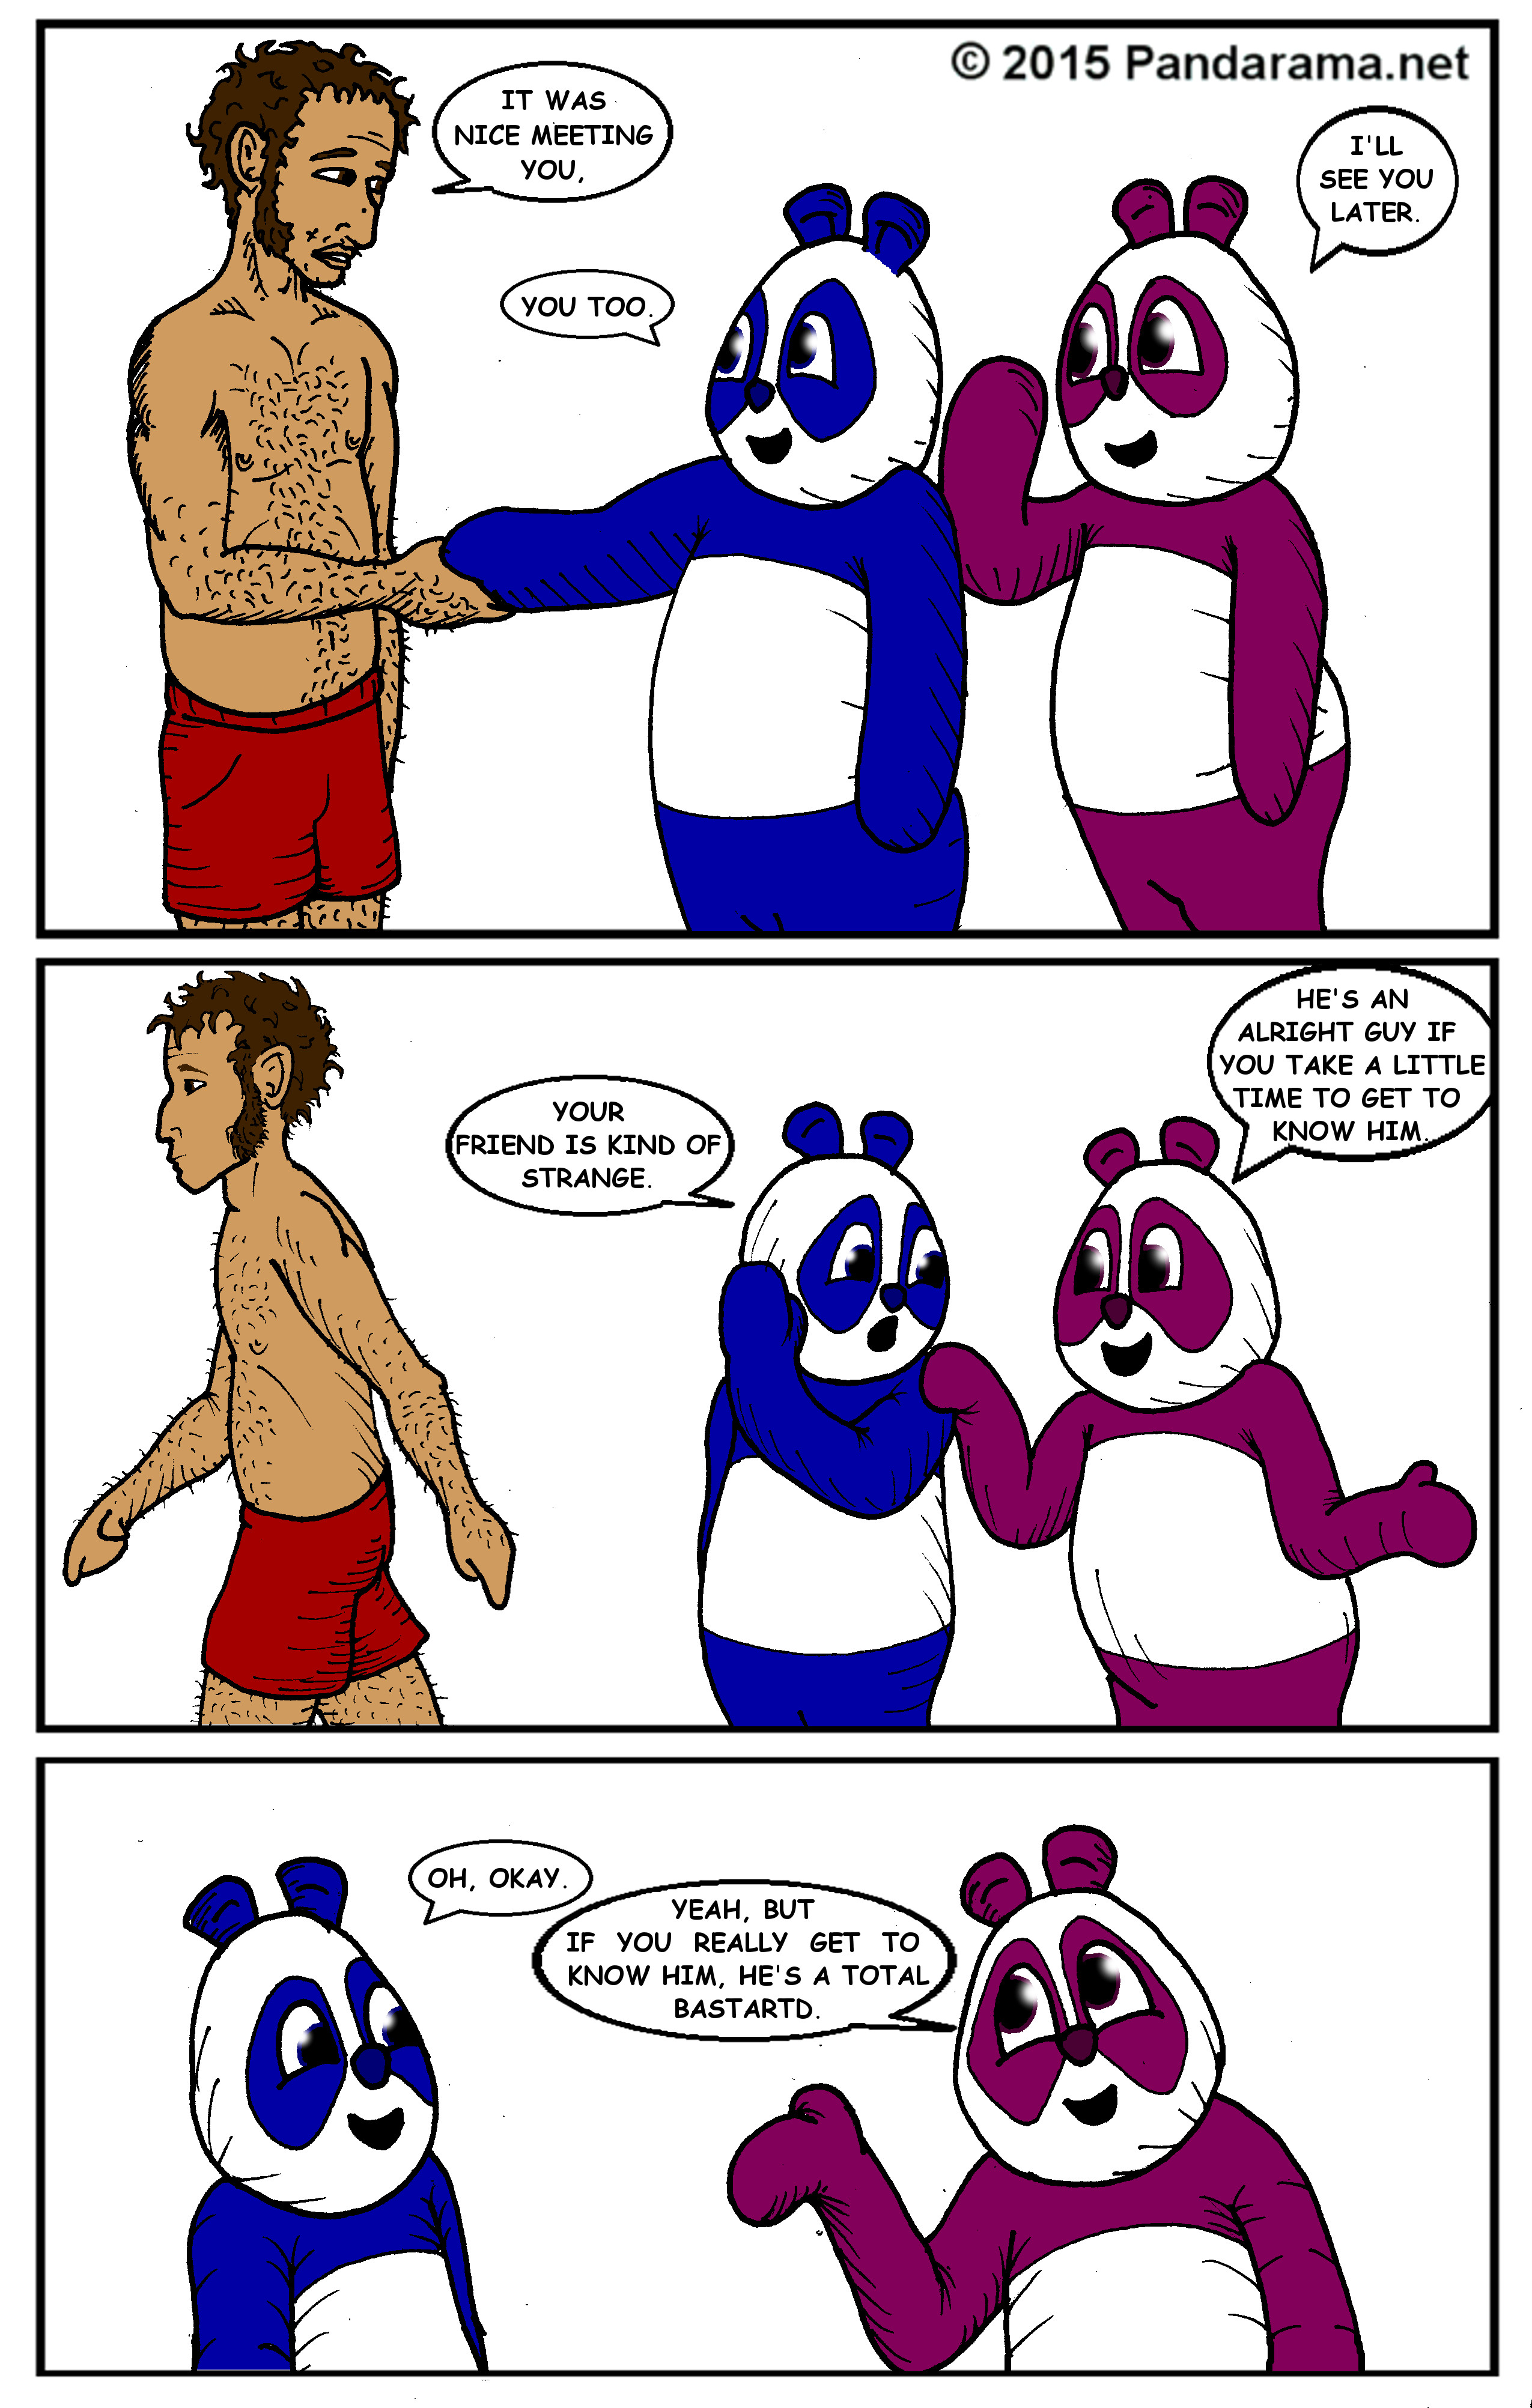 Pandarama Pandarama.net comicstrip strange, but nice guy if you take a time to get to know him, if you really know him, he's a bastard.